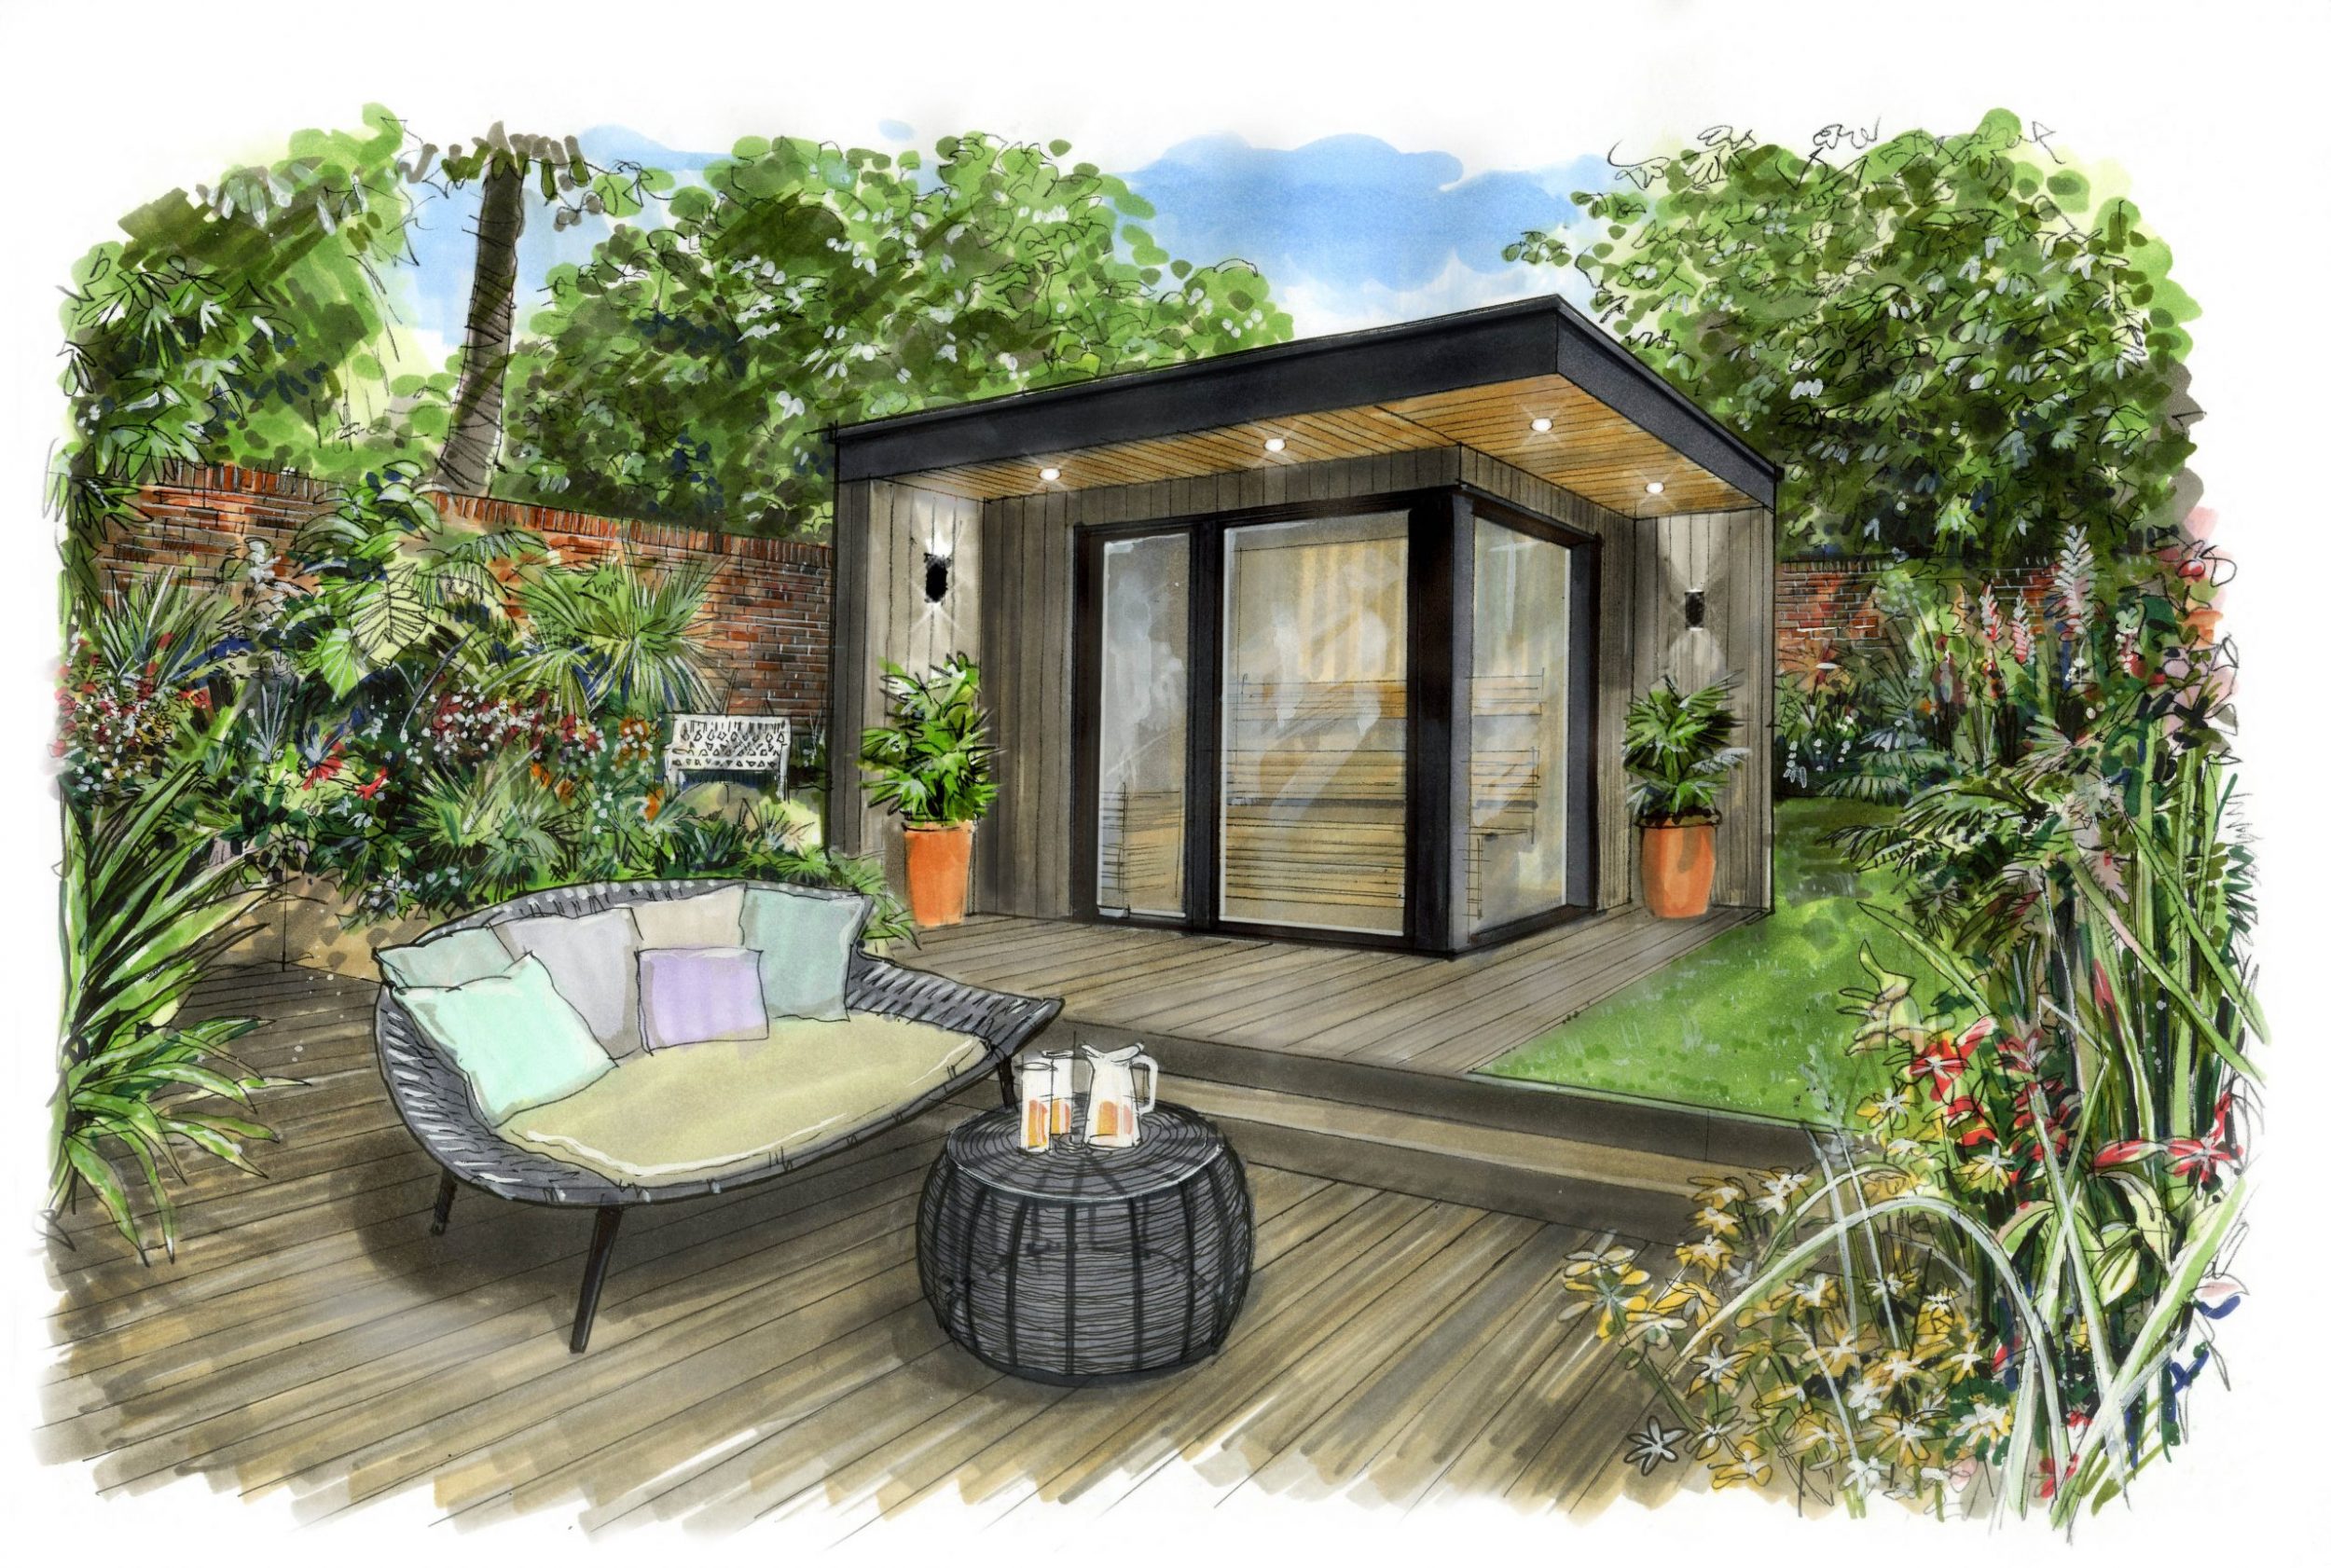 Drawing of an outdoor garden room with a sofa outside